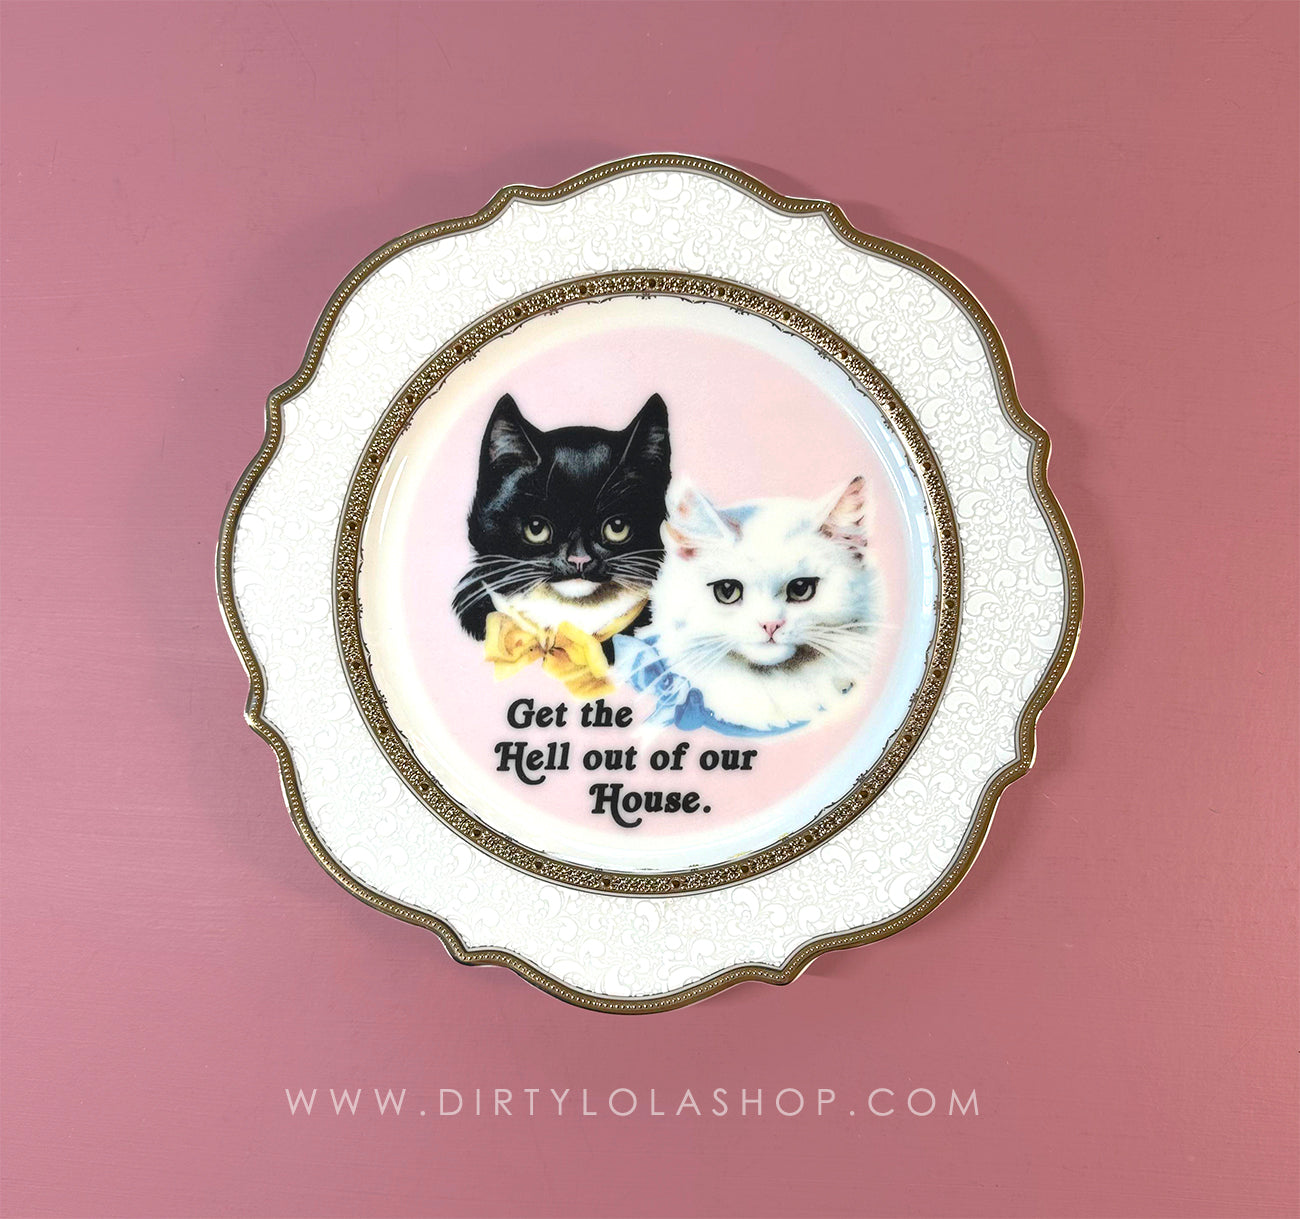 PRE-ORDER - FOOD SAFE - NEW -  Antique Style Plate - "Get the Hell Out of Our House."